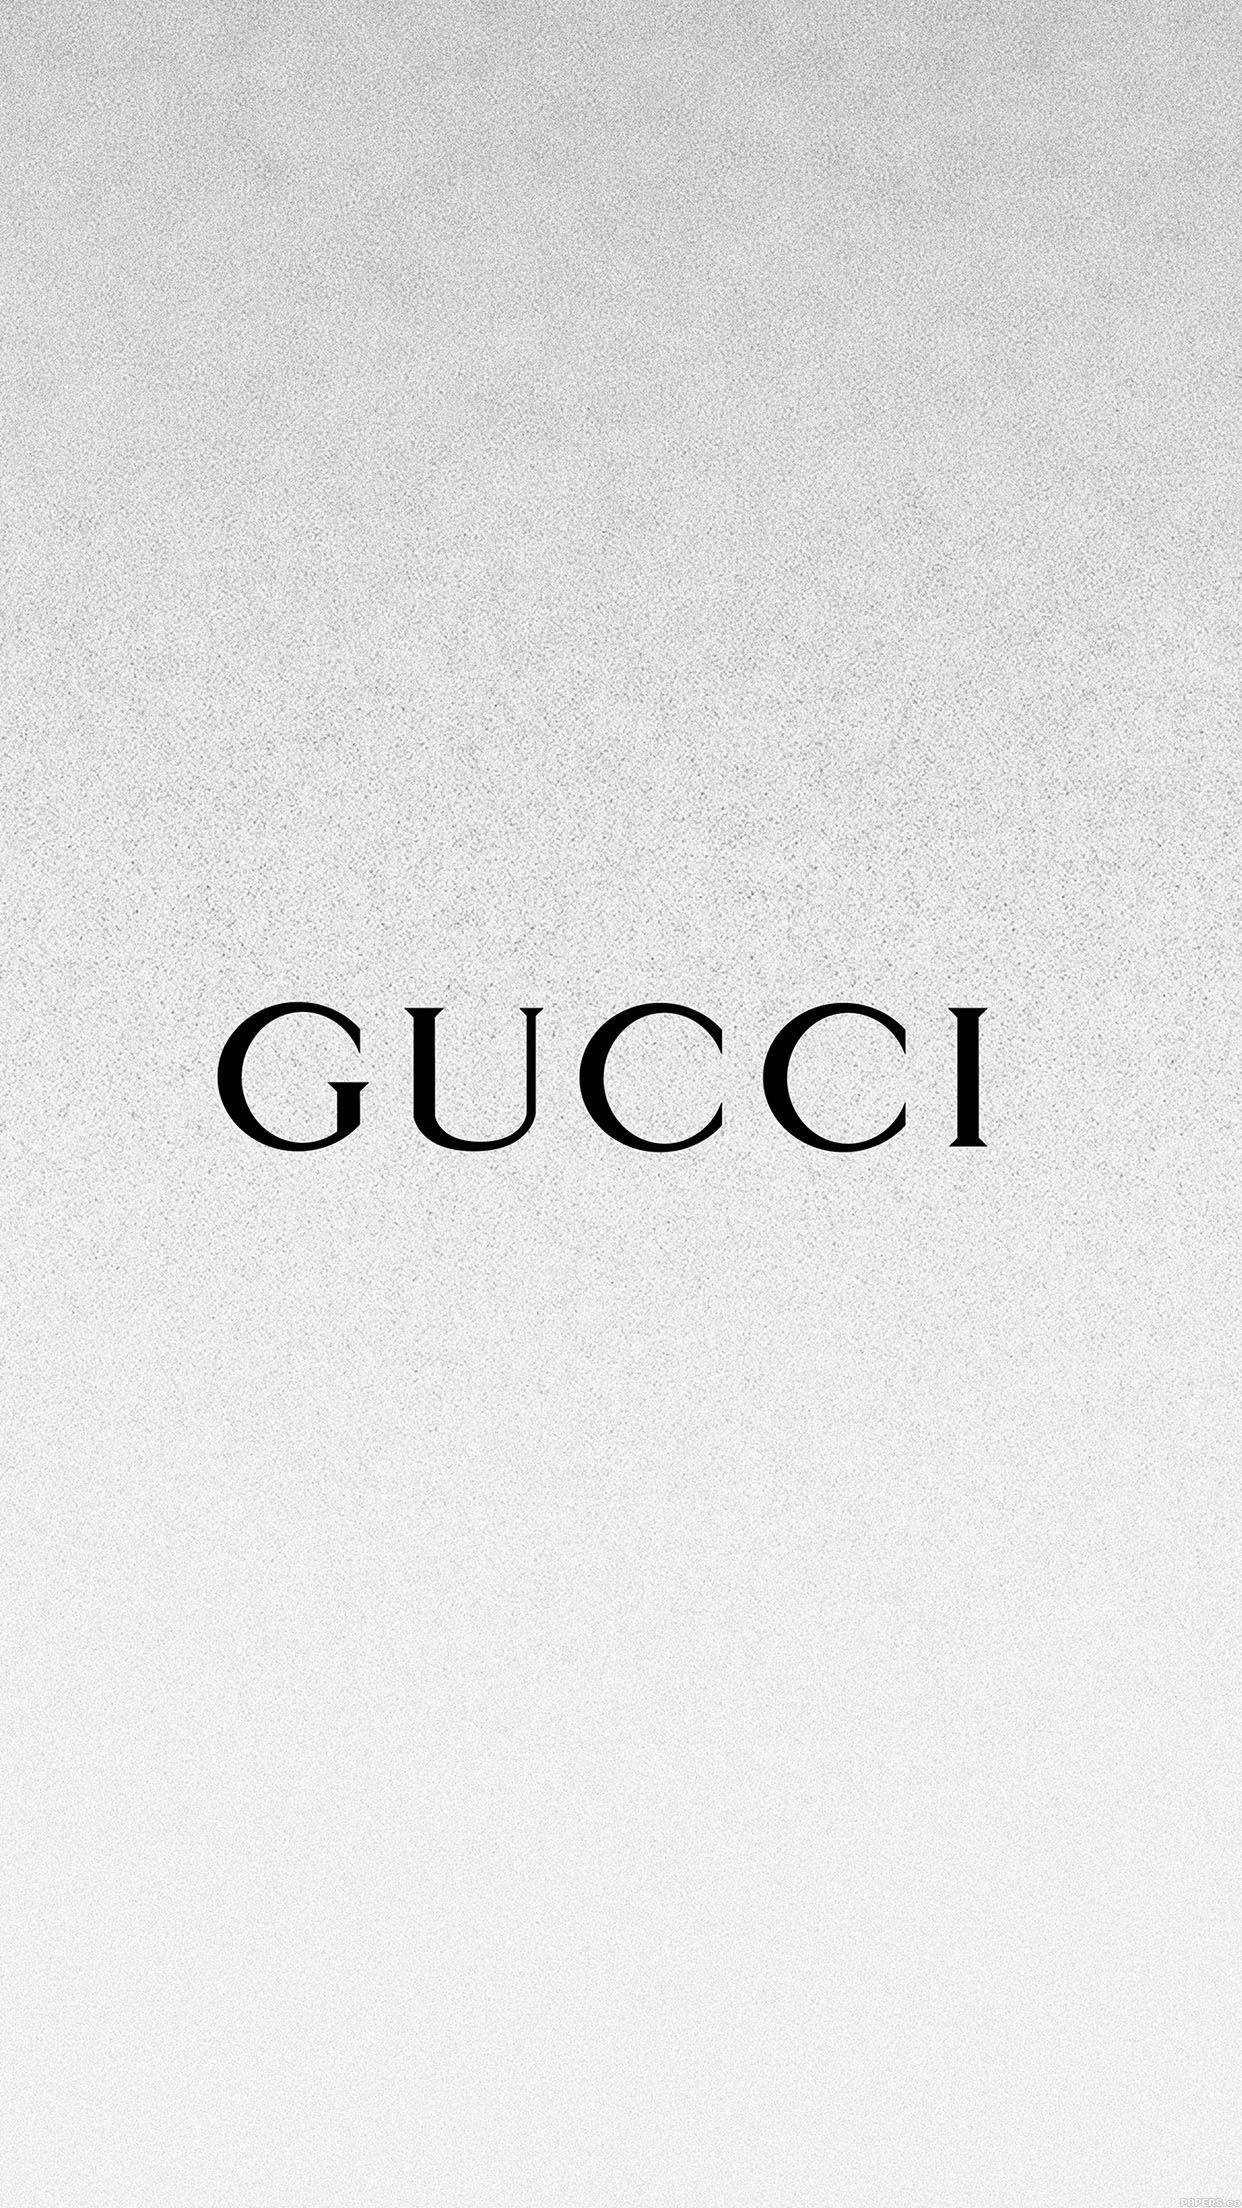 Gucci Iphone 6 Wallpapers Top Free Gucci Iphone 6 Backgrounds Wallpaperaccess